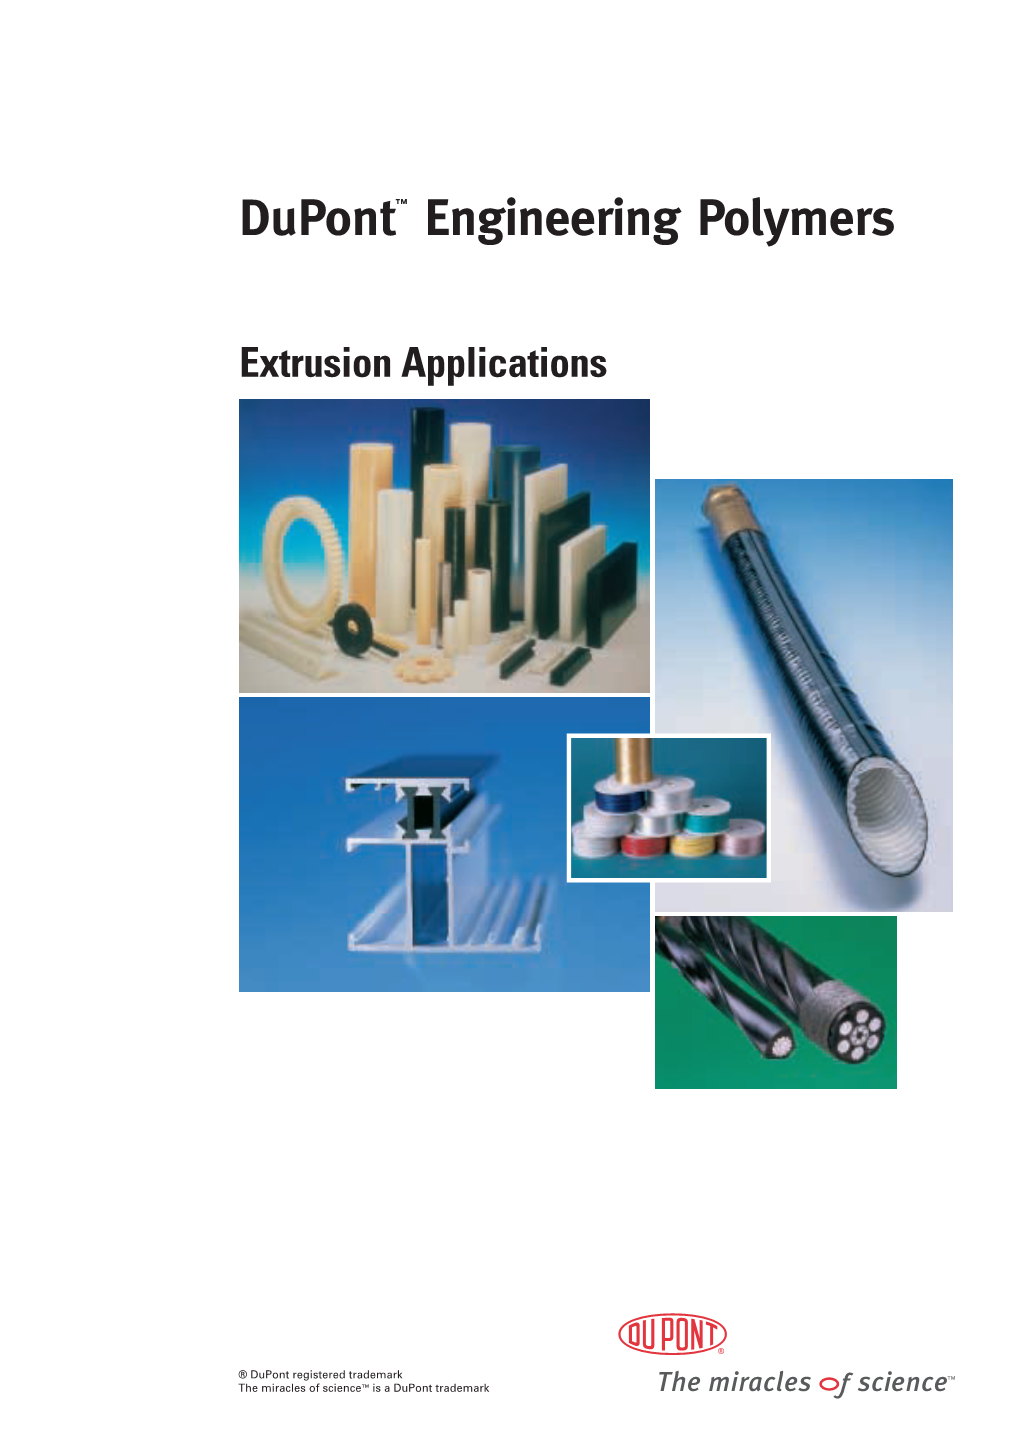 Extrusion Applications